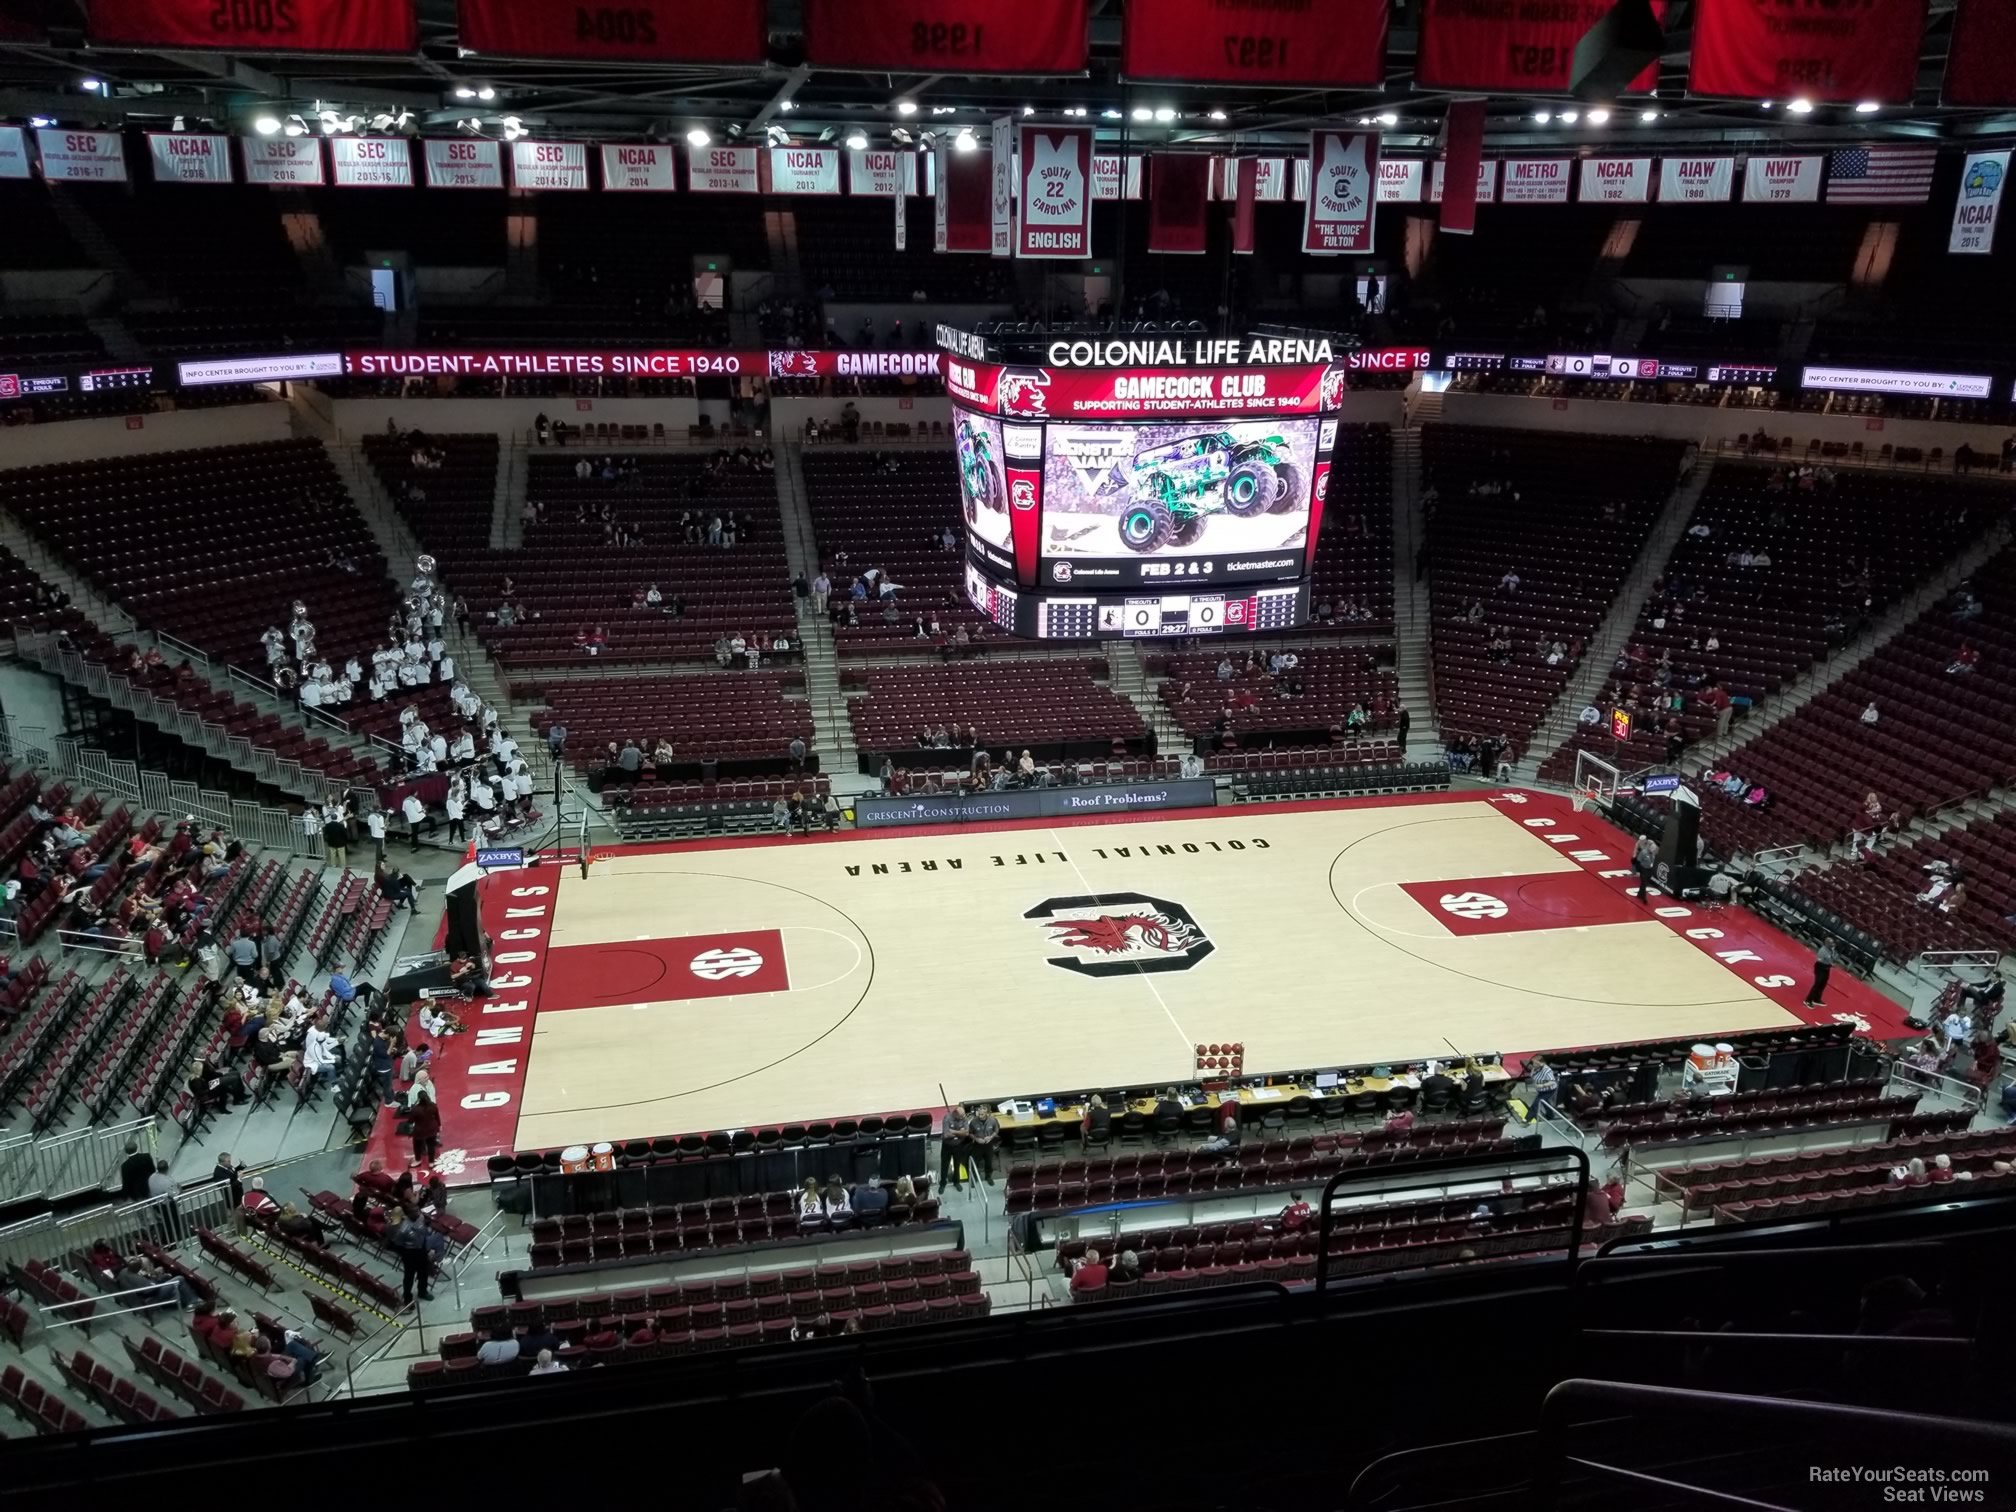 section 209, row 7 seat view  for basketball - colonial life arena